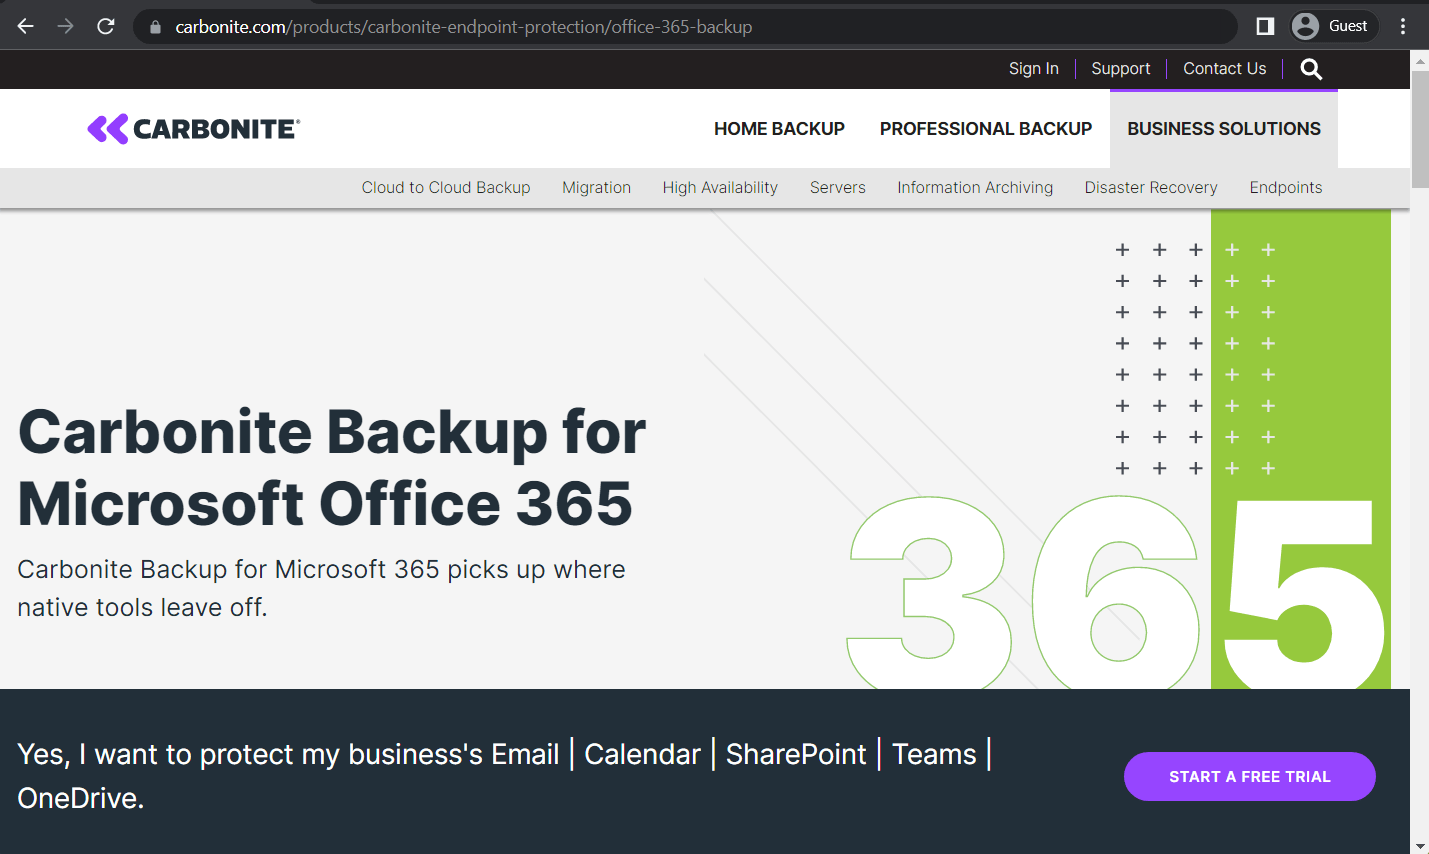 Microsoft 365 SaaS Backups: Keep Your Business Data Safe and Secure